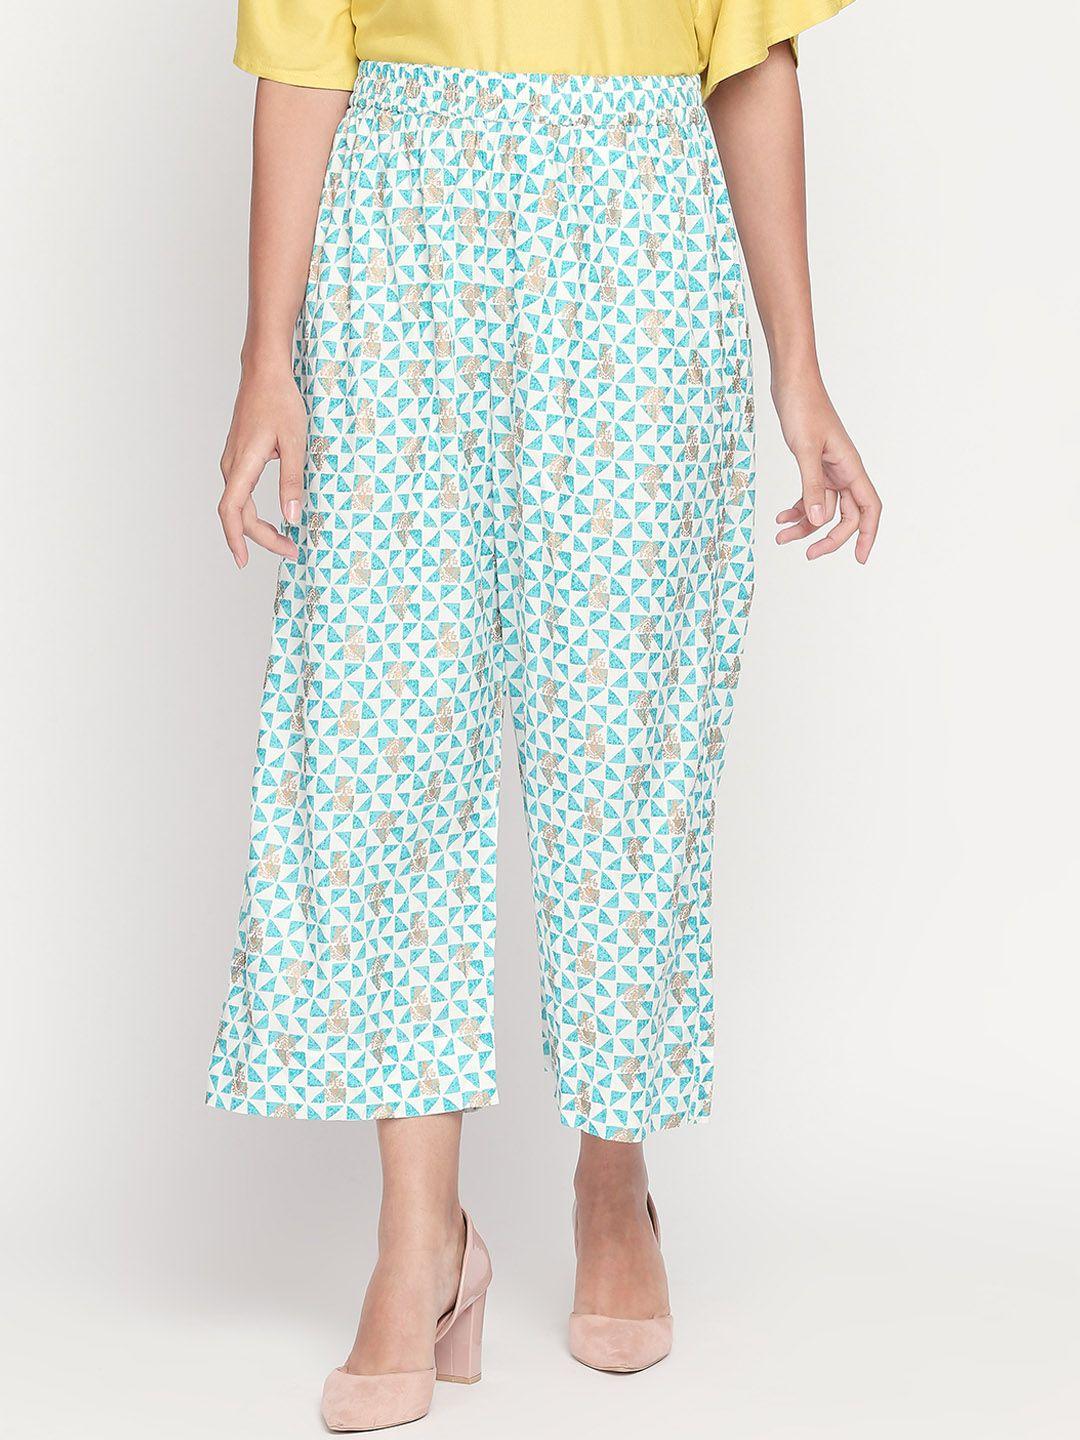 rangmanch by pantaloons women turquoise blue printed trousers